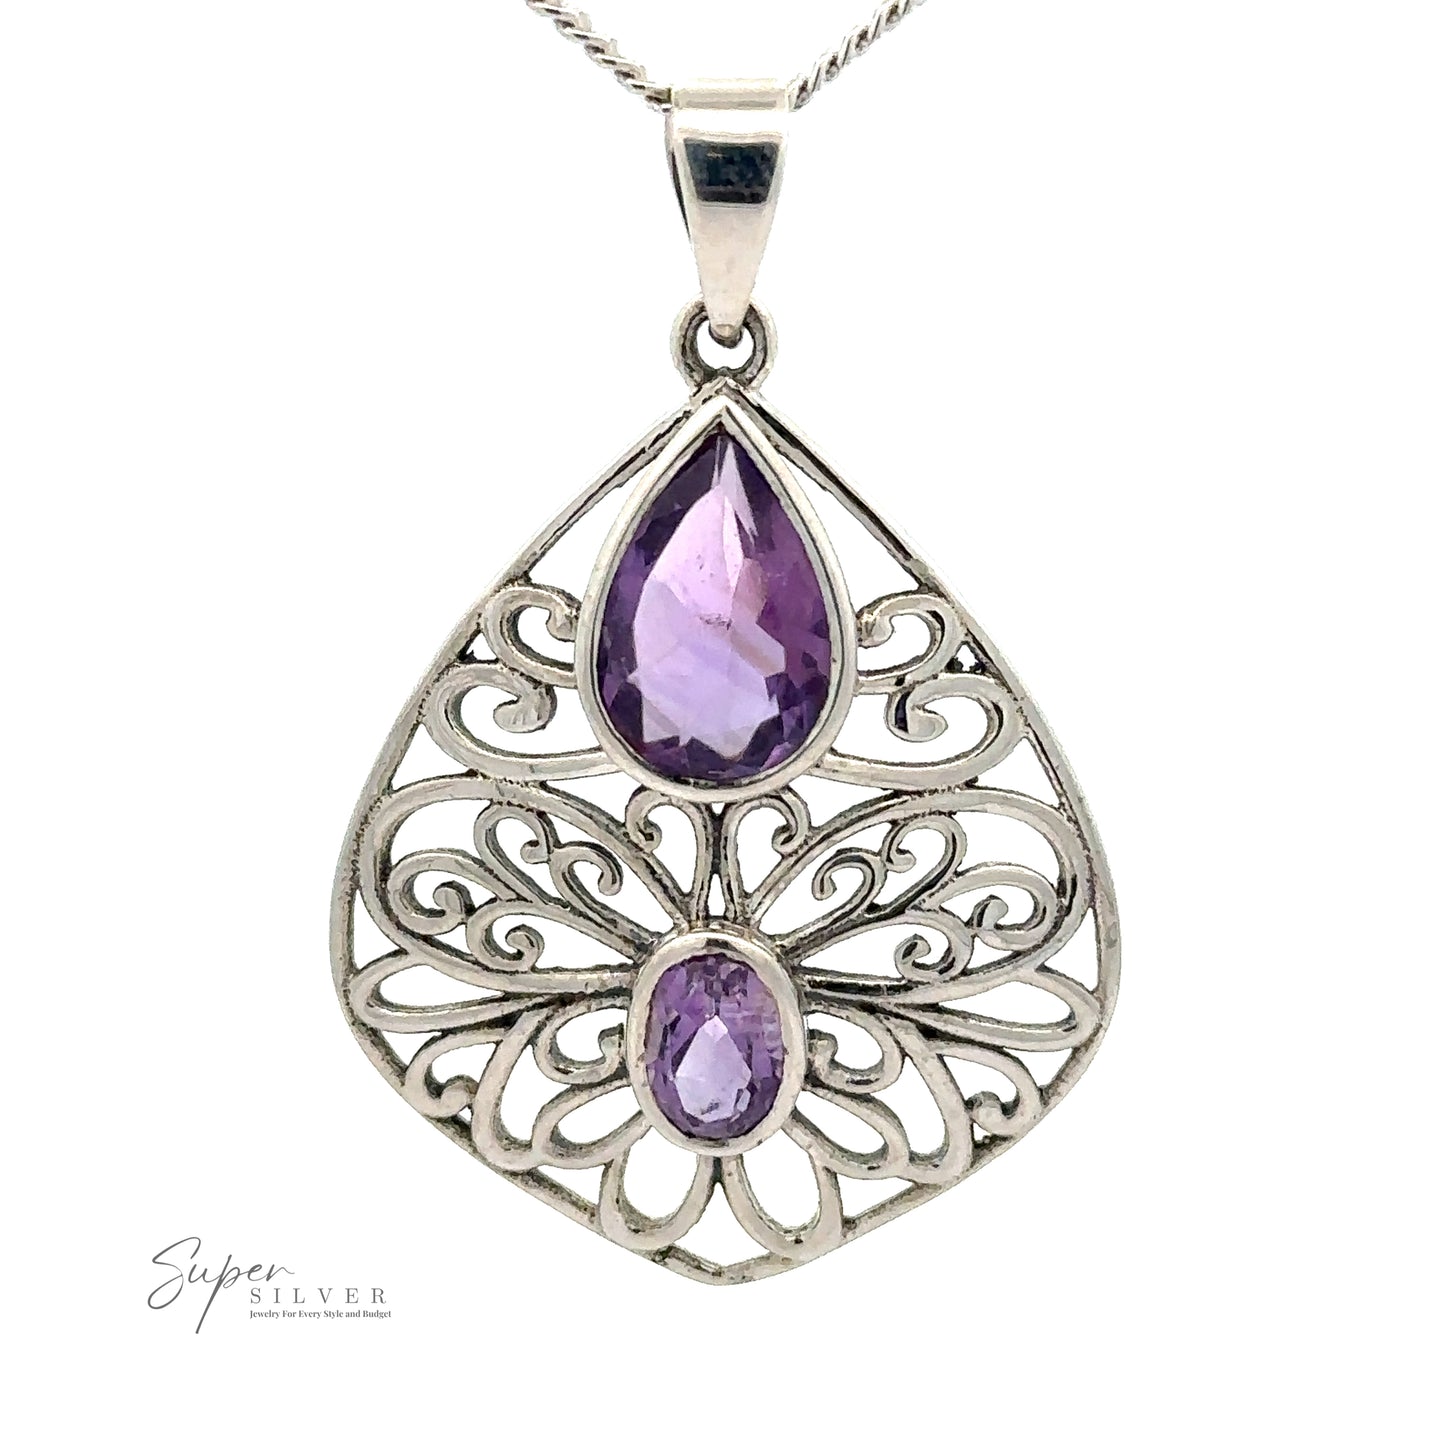 A Teardrop Filigree Gemstone Pendants with two purple amethyst gemstones, one teardrop-shaped at the top and one oval-shaped at the bottom, featuring intricate filigree detailing.